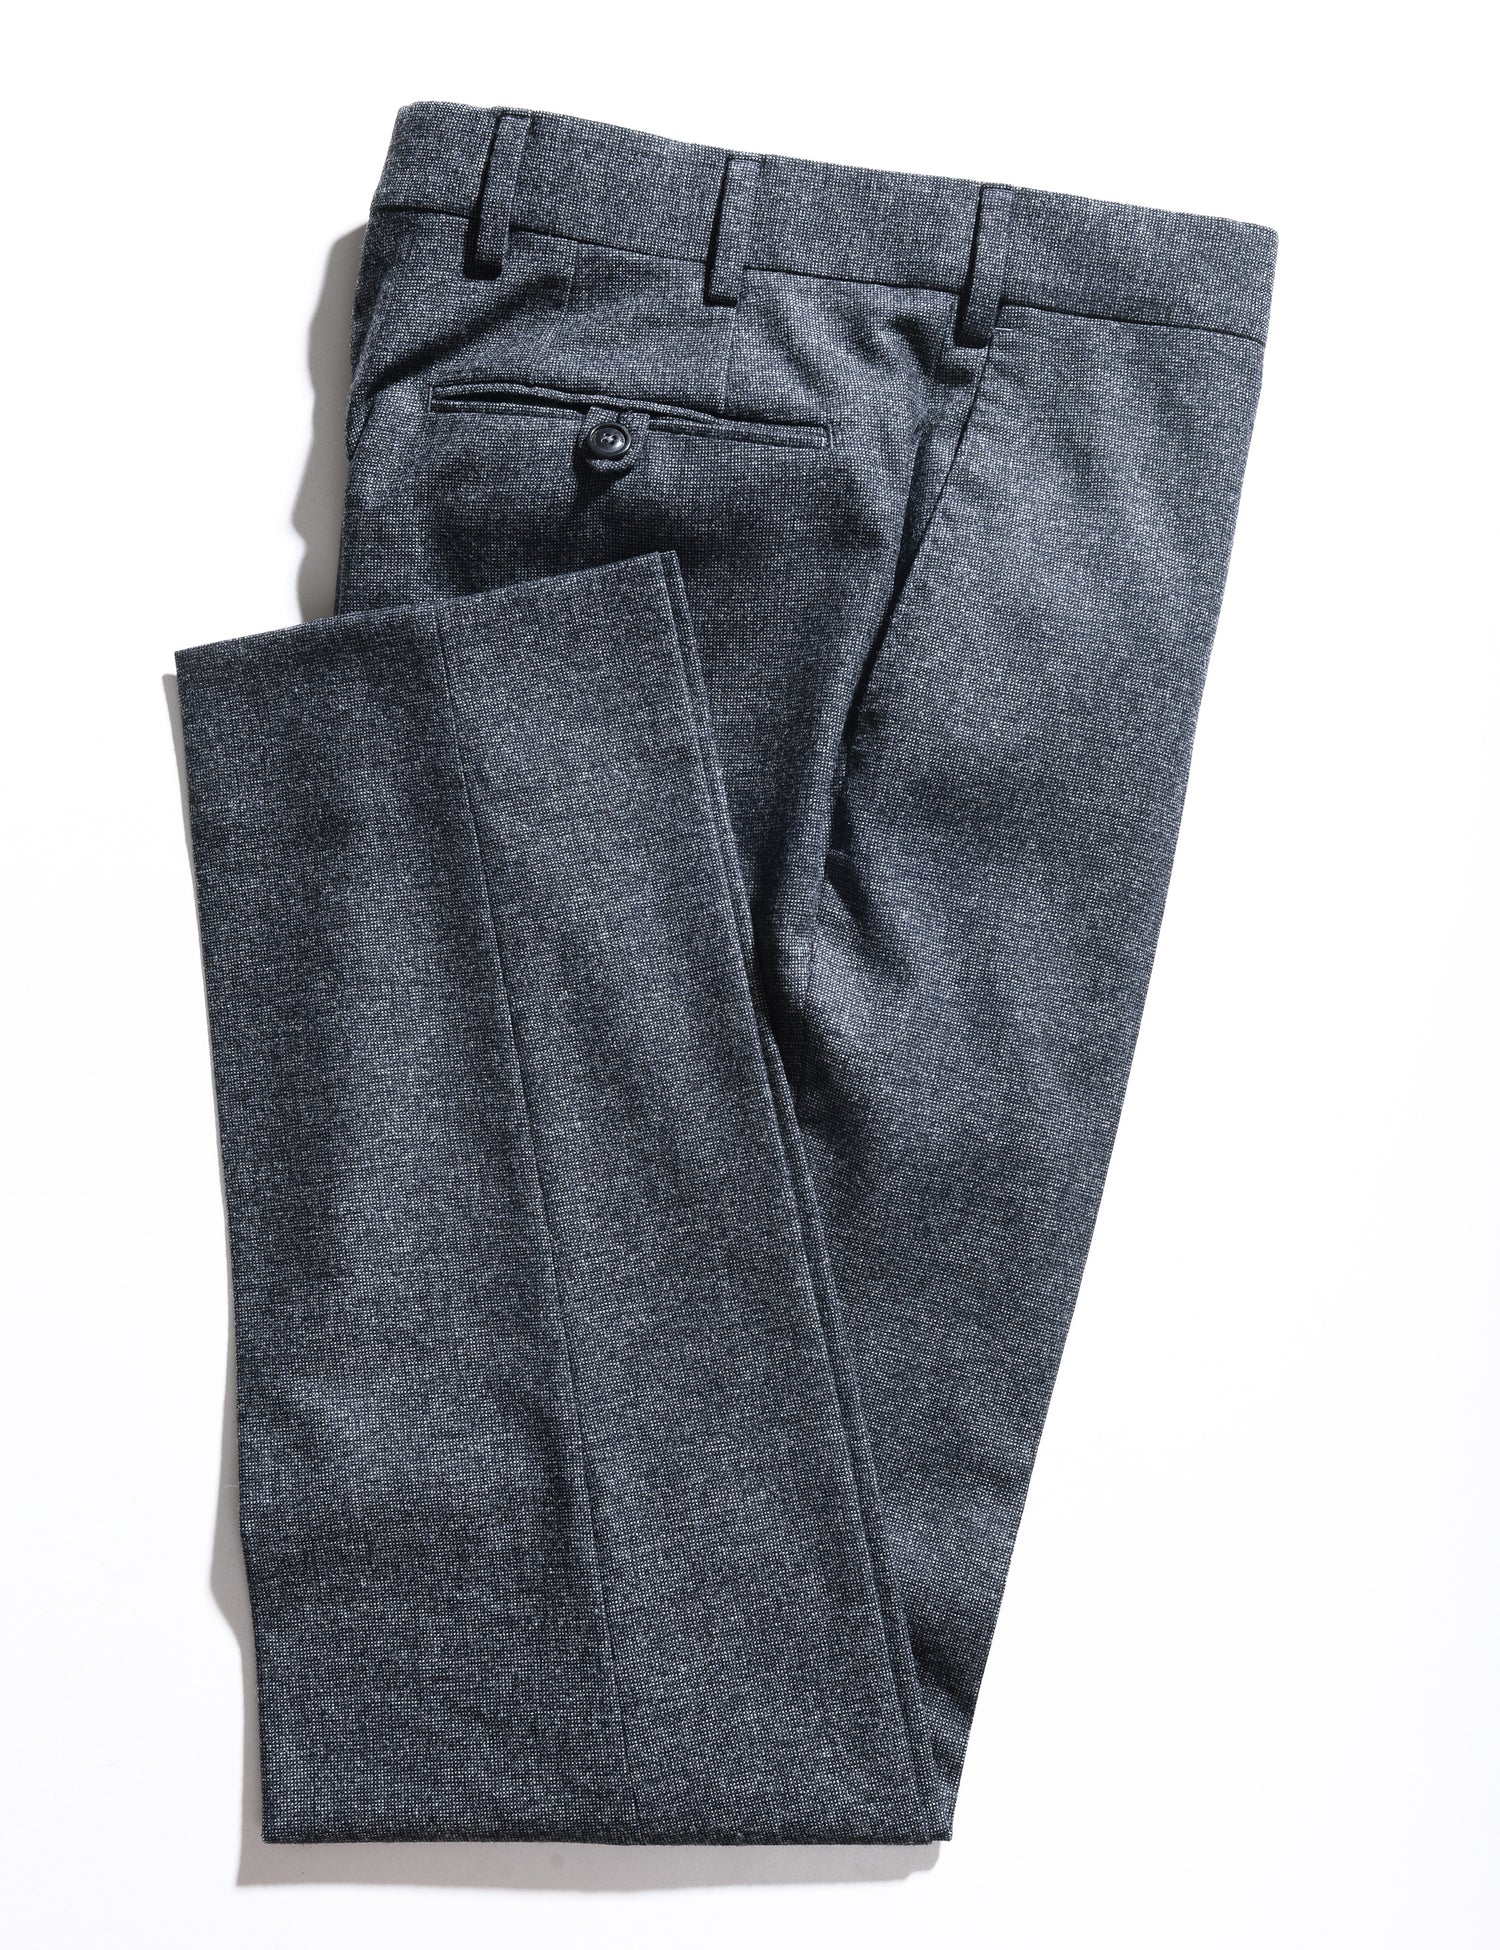 Folded detail shot of BKT50 Tailored Trousers in Flannel Tickweave - Deep Gray